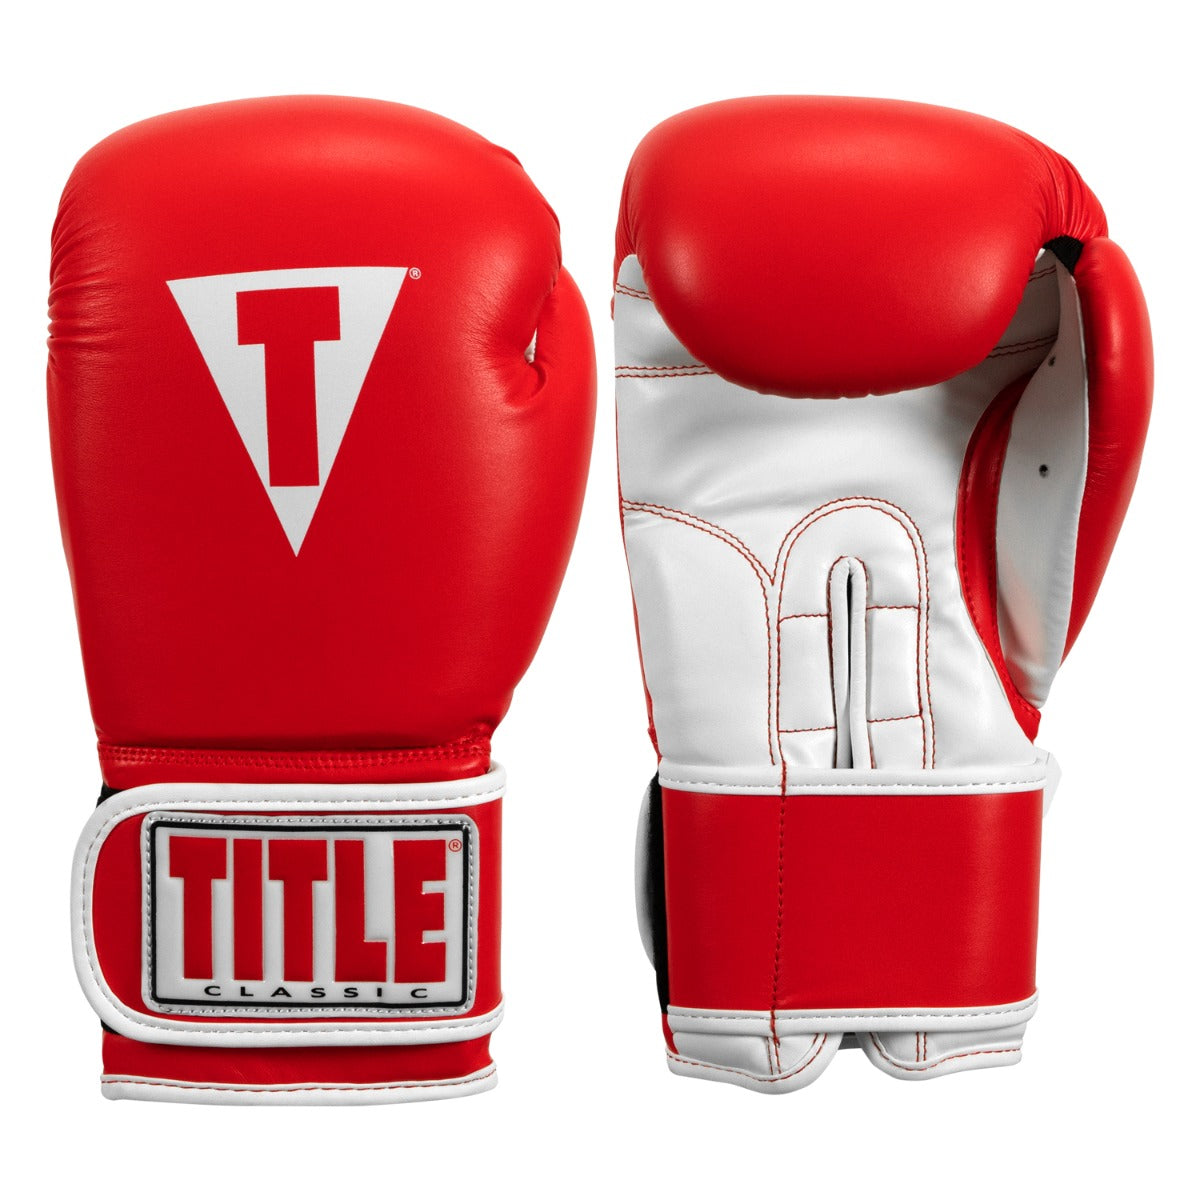 TITLE Classic Pro Style Training Gloves 3.0 TITLE Boxing Gear